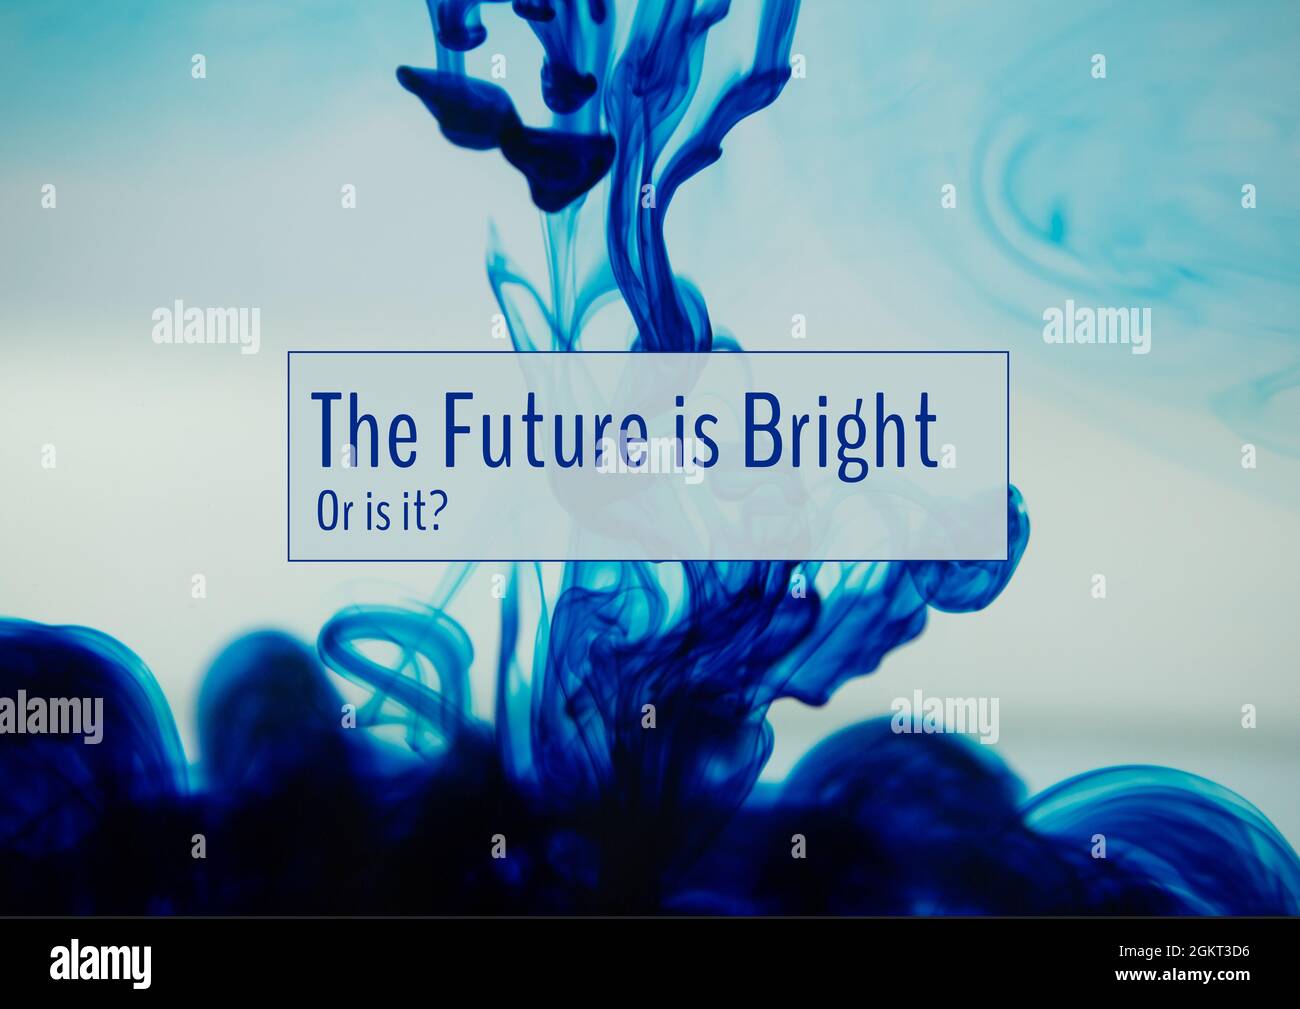 The future is bright text banner against dye in the water against blue background Stock Photo